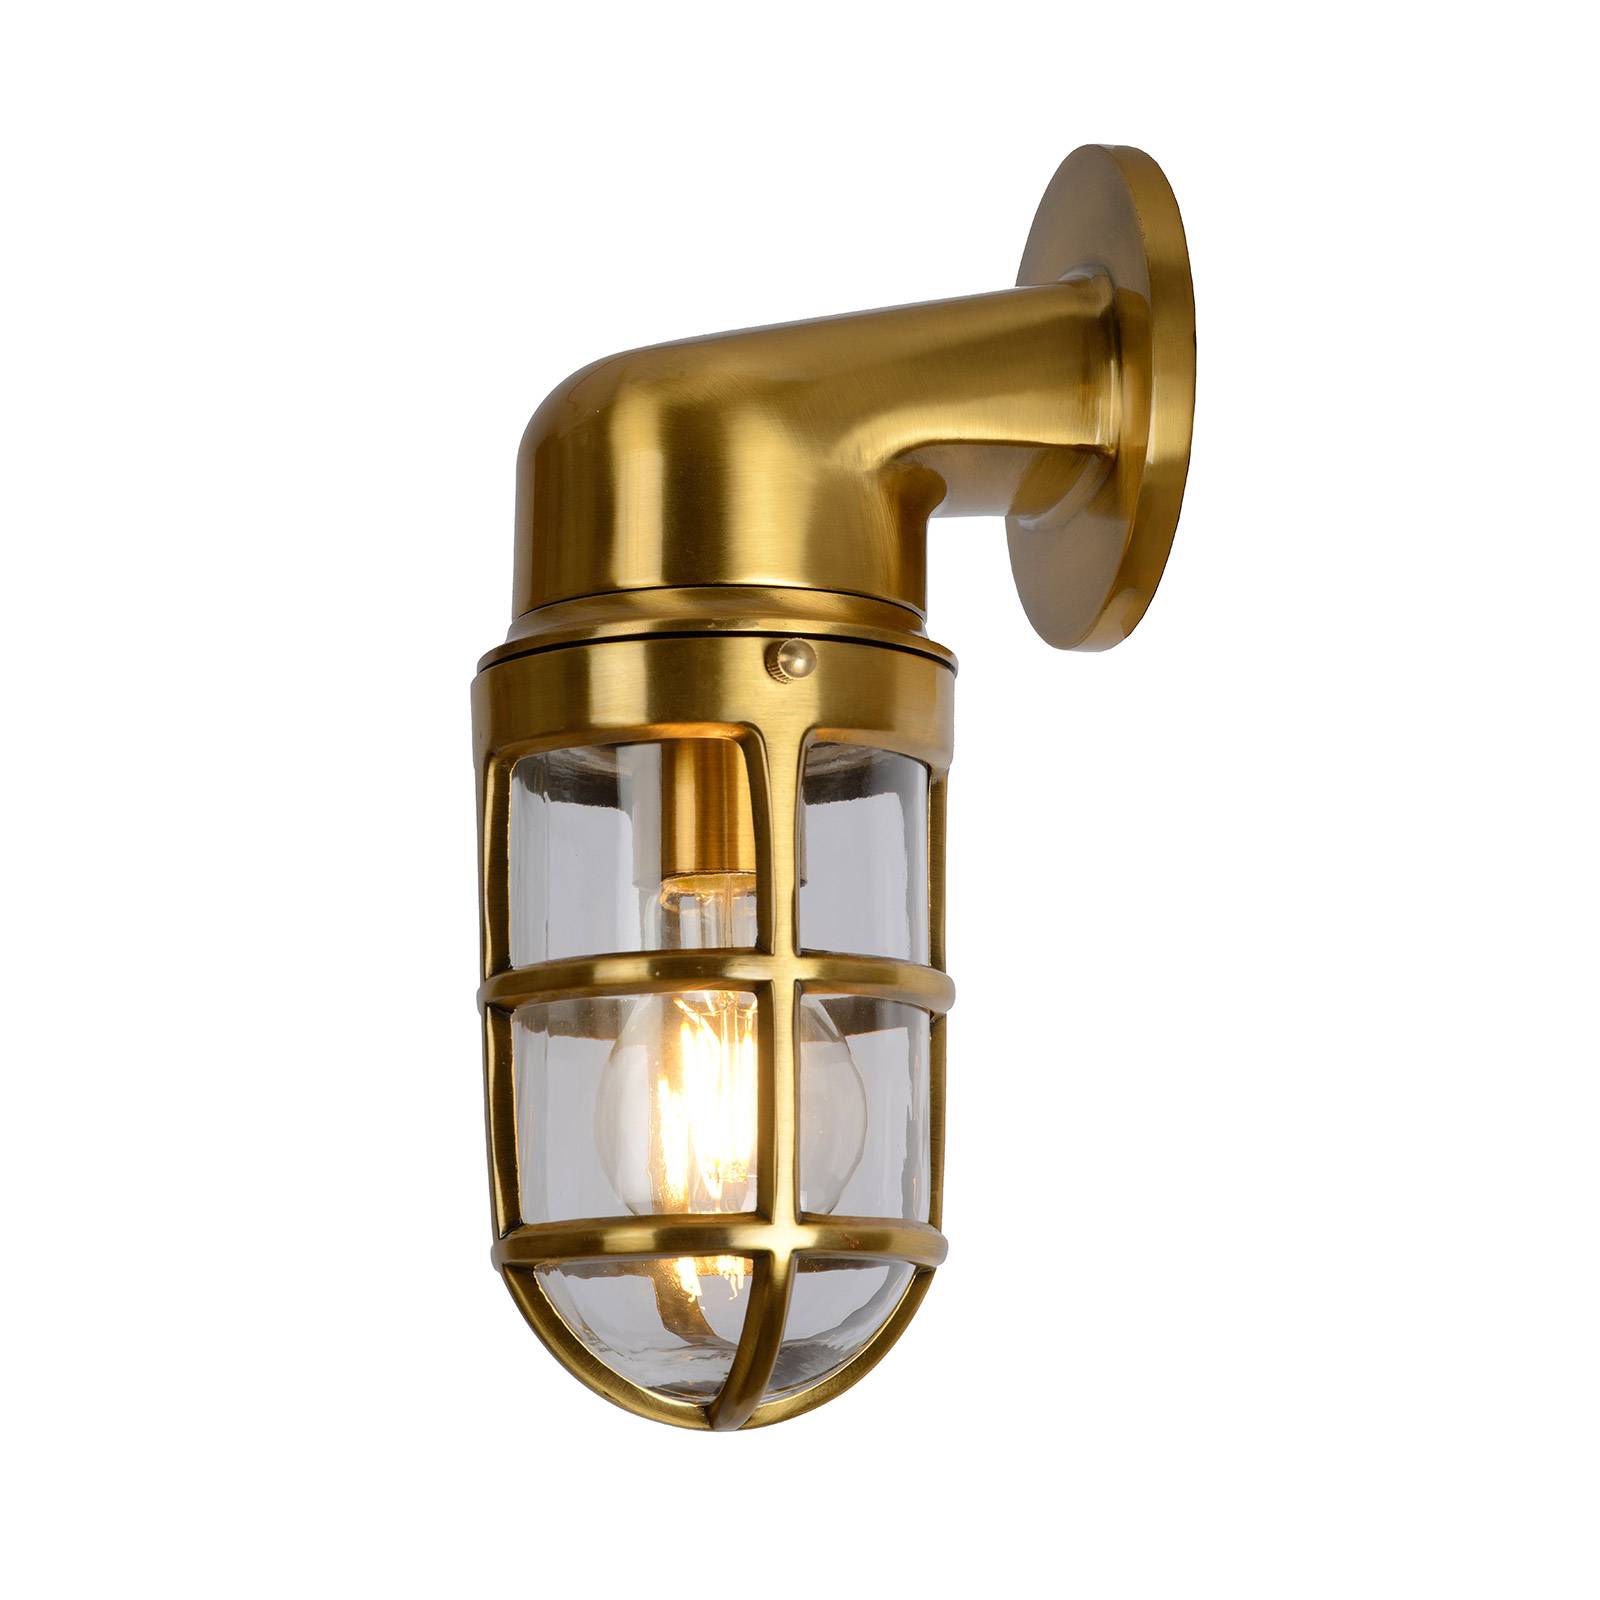 Dudley outdoor wall light, protruding down, brass